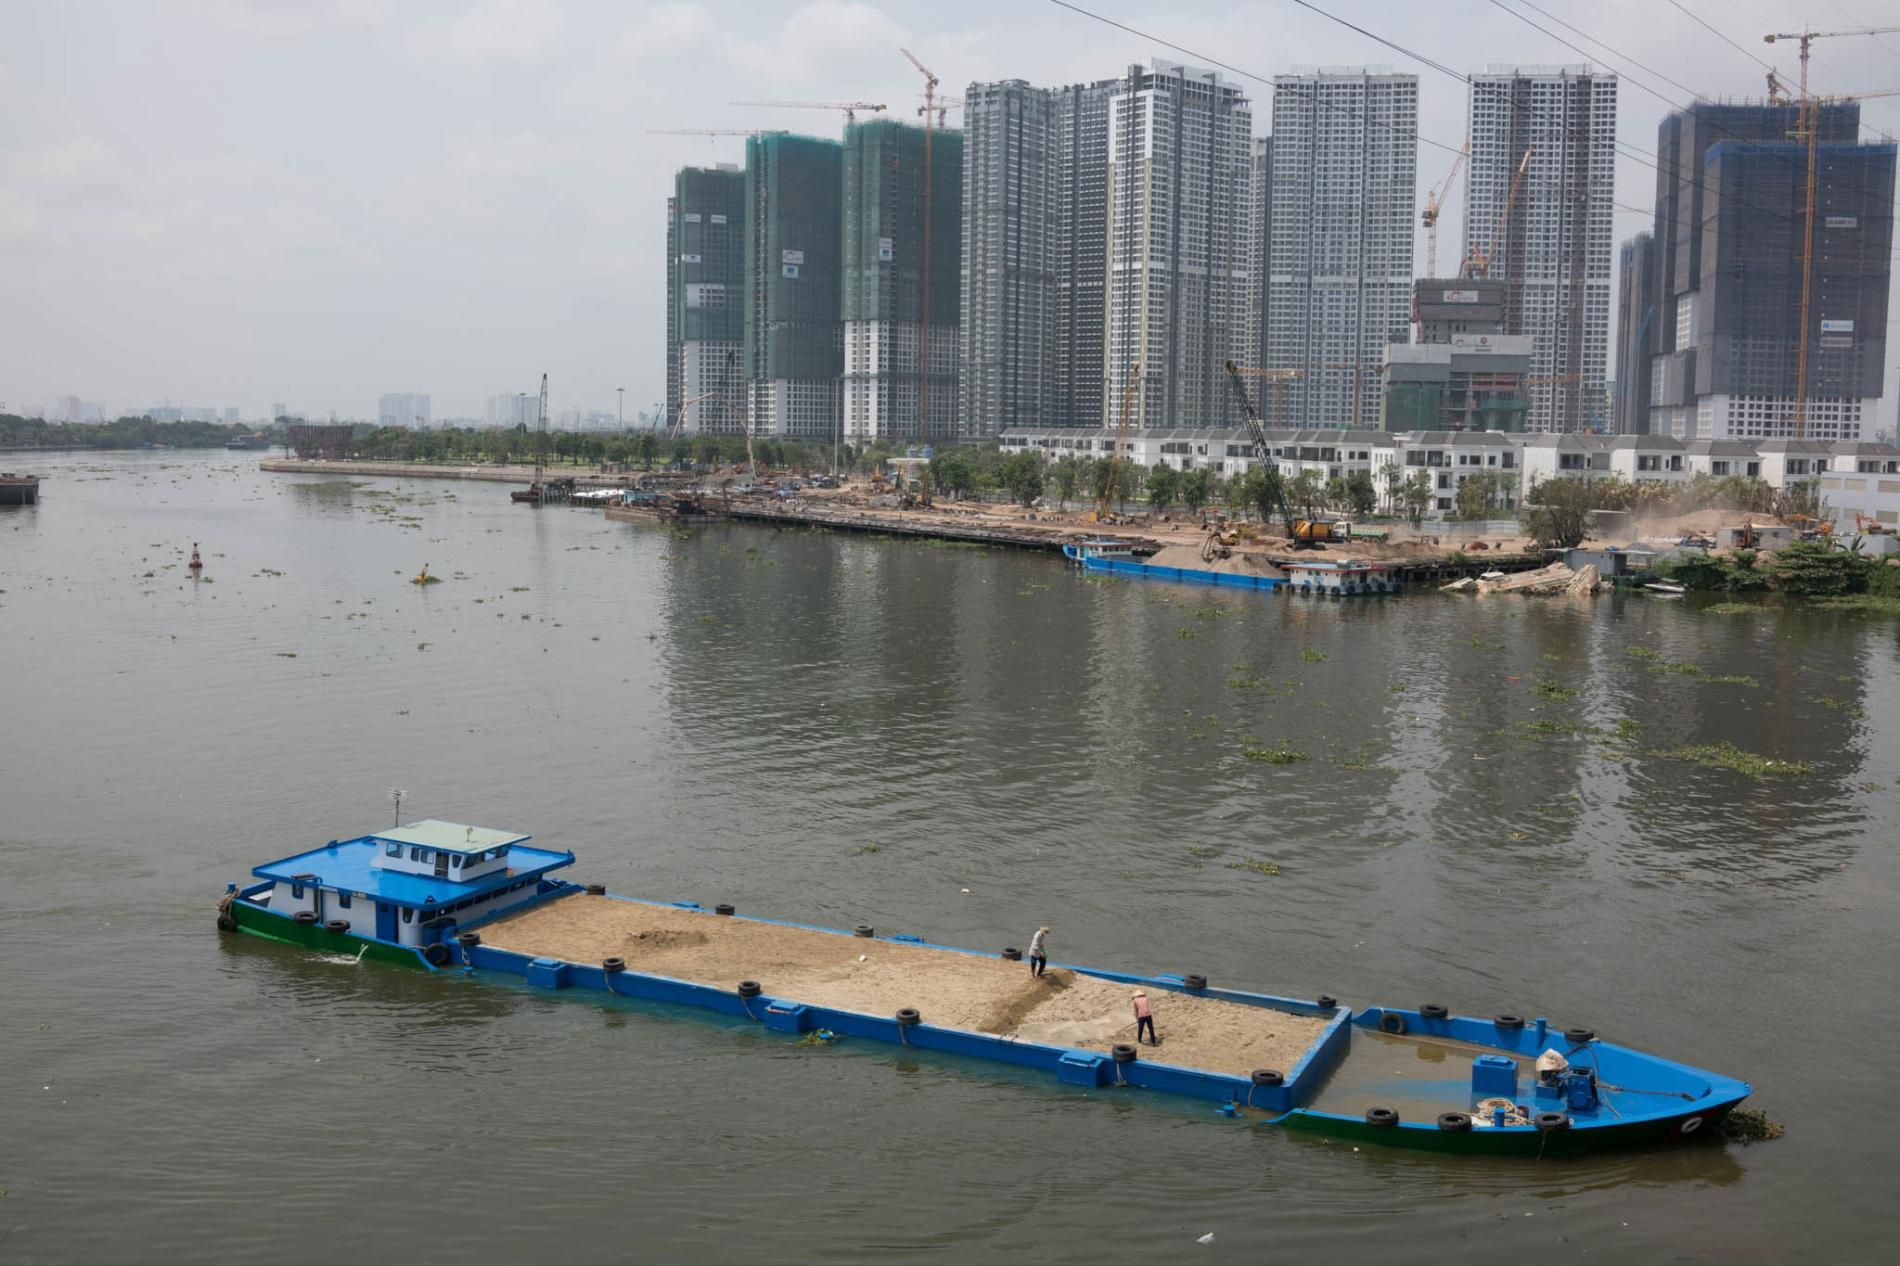 Ho Chi Minh City, formerly known as Saigon, is Vietnam's economic center. Much of the sand being dredged and pumped up from the Mekong goes towards construction here and in other cities in southern Vietnam. But some has been exported to Singapore, which requires large amounts of sand for land reclamation projects. Image by Sim Chi Yin. Vietnam, 2017.

